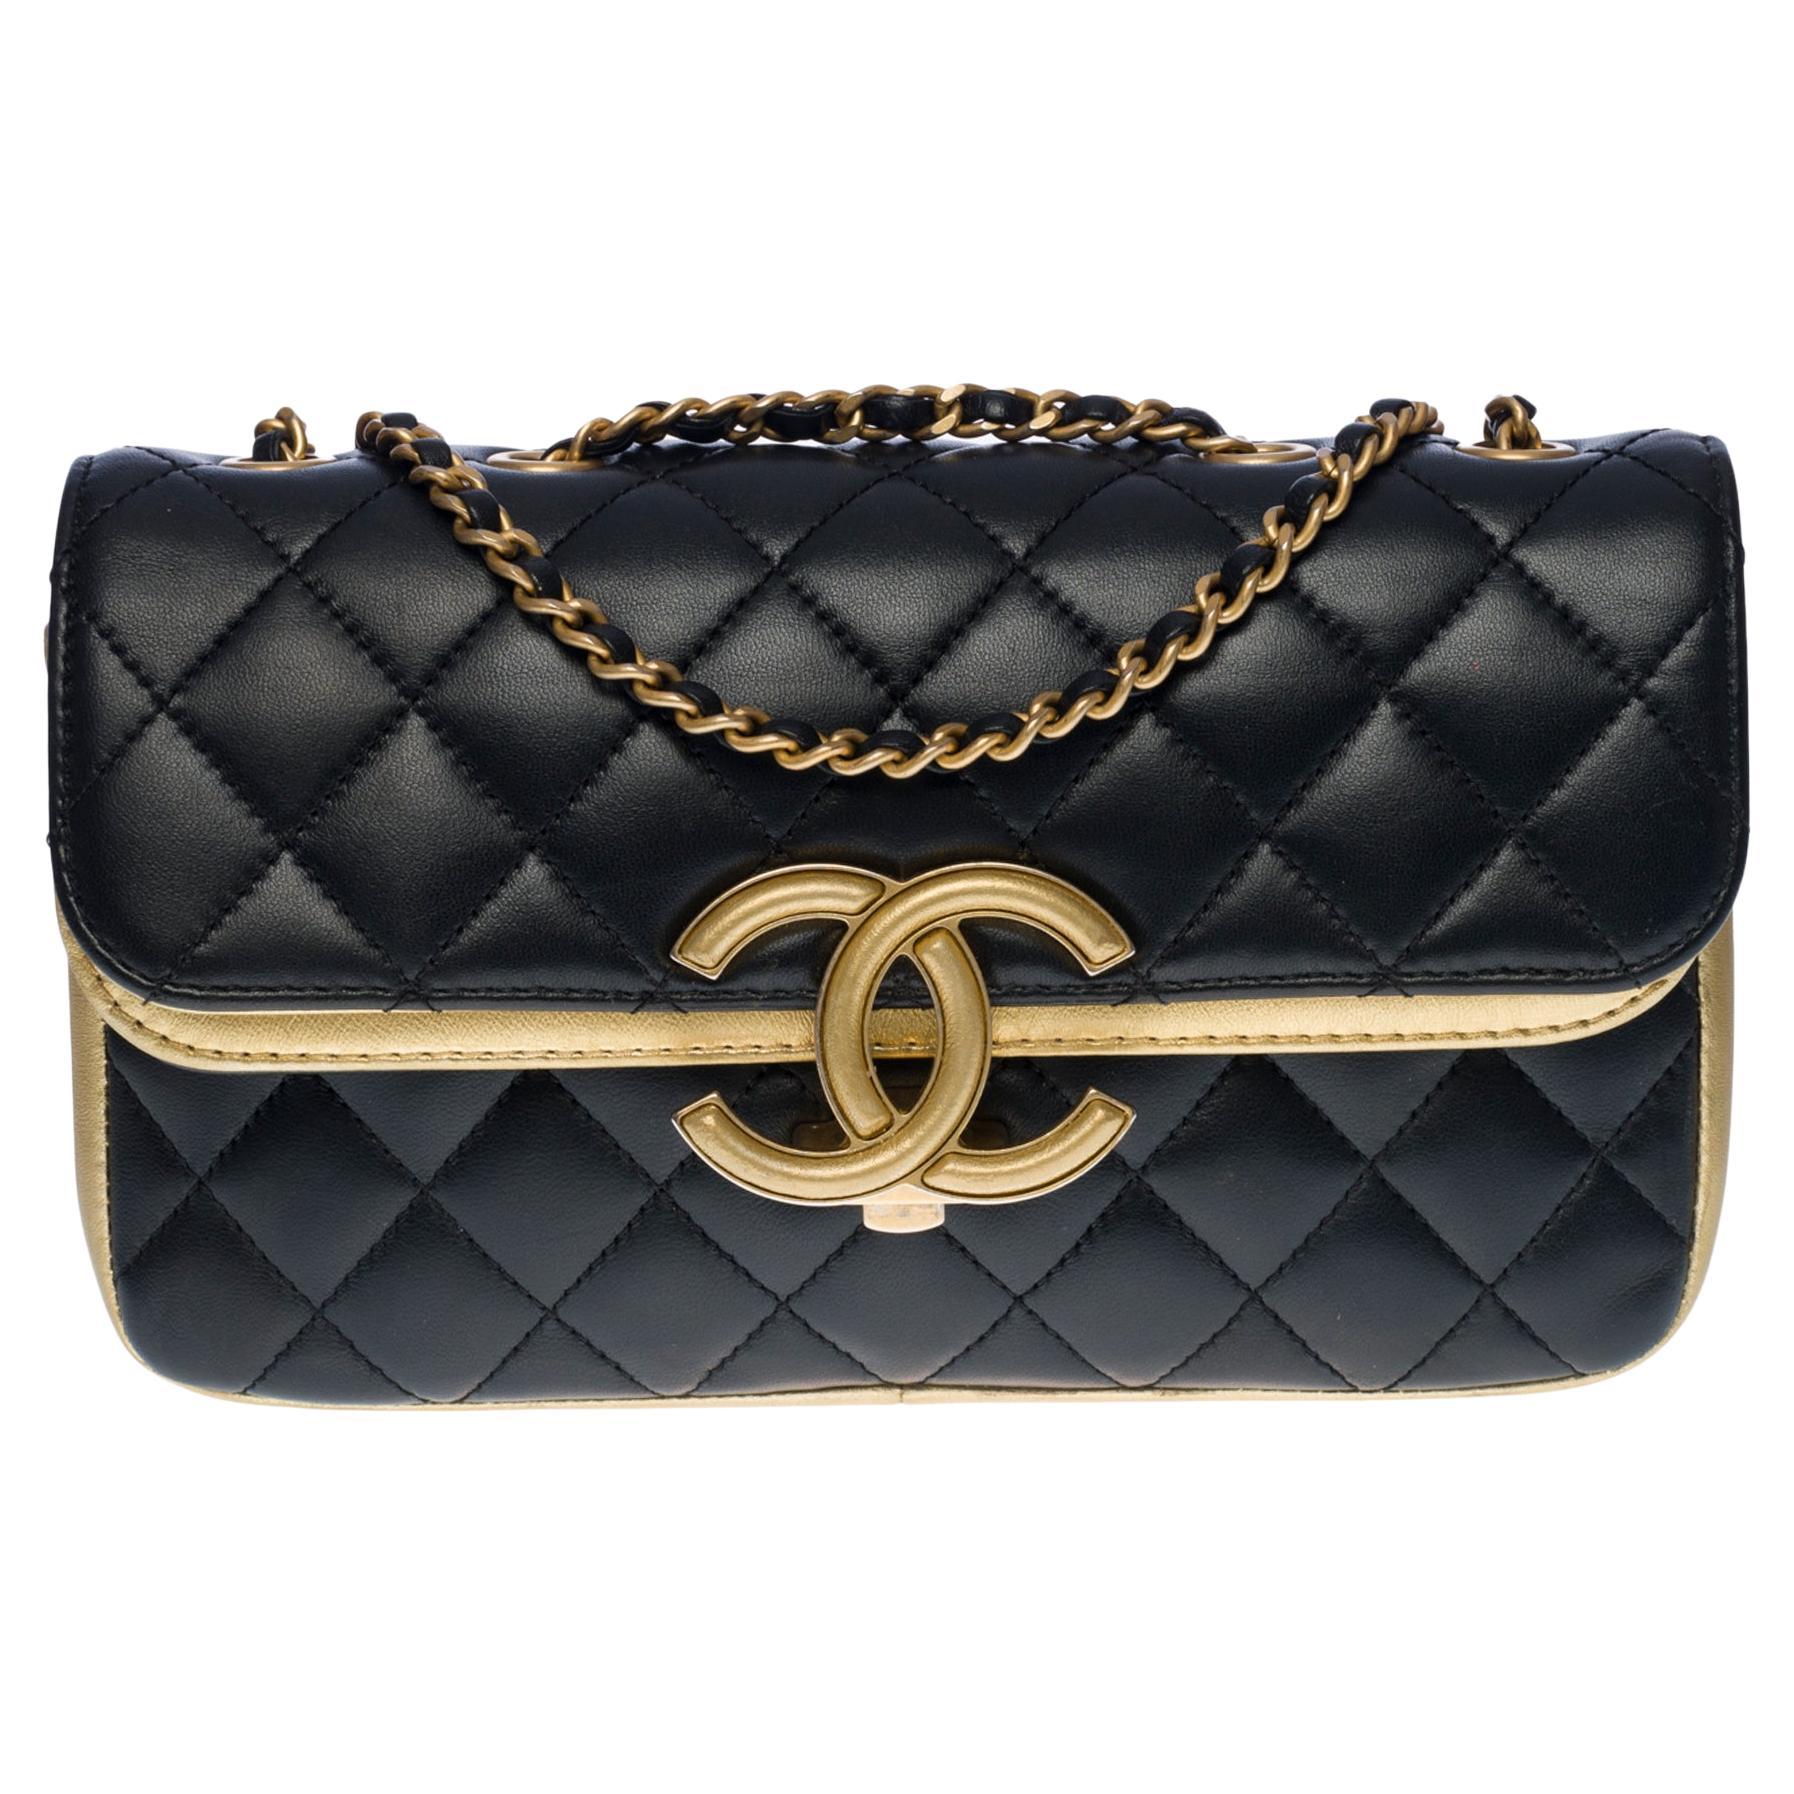 Chanel CC Chic Double Flap Quilted Beige Metallic Leather Medium Crossbody  Bag